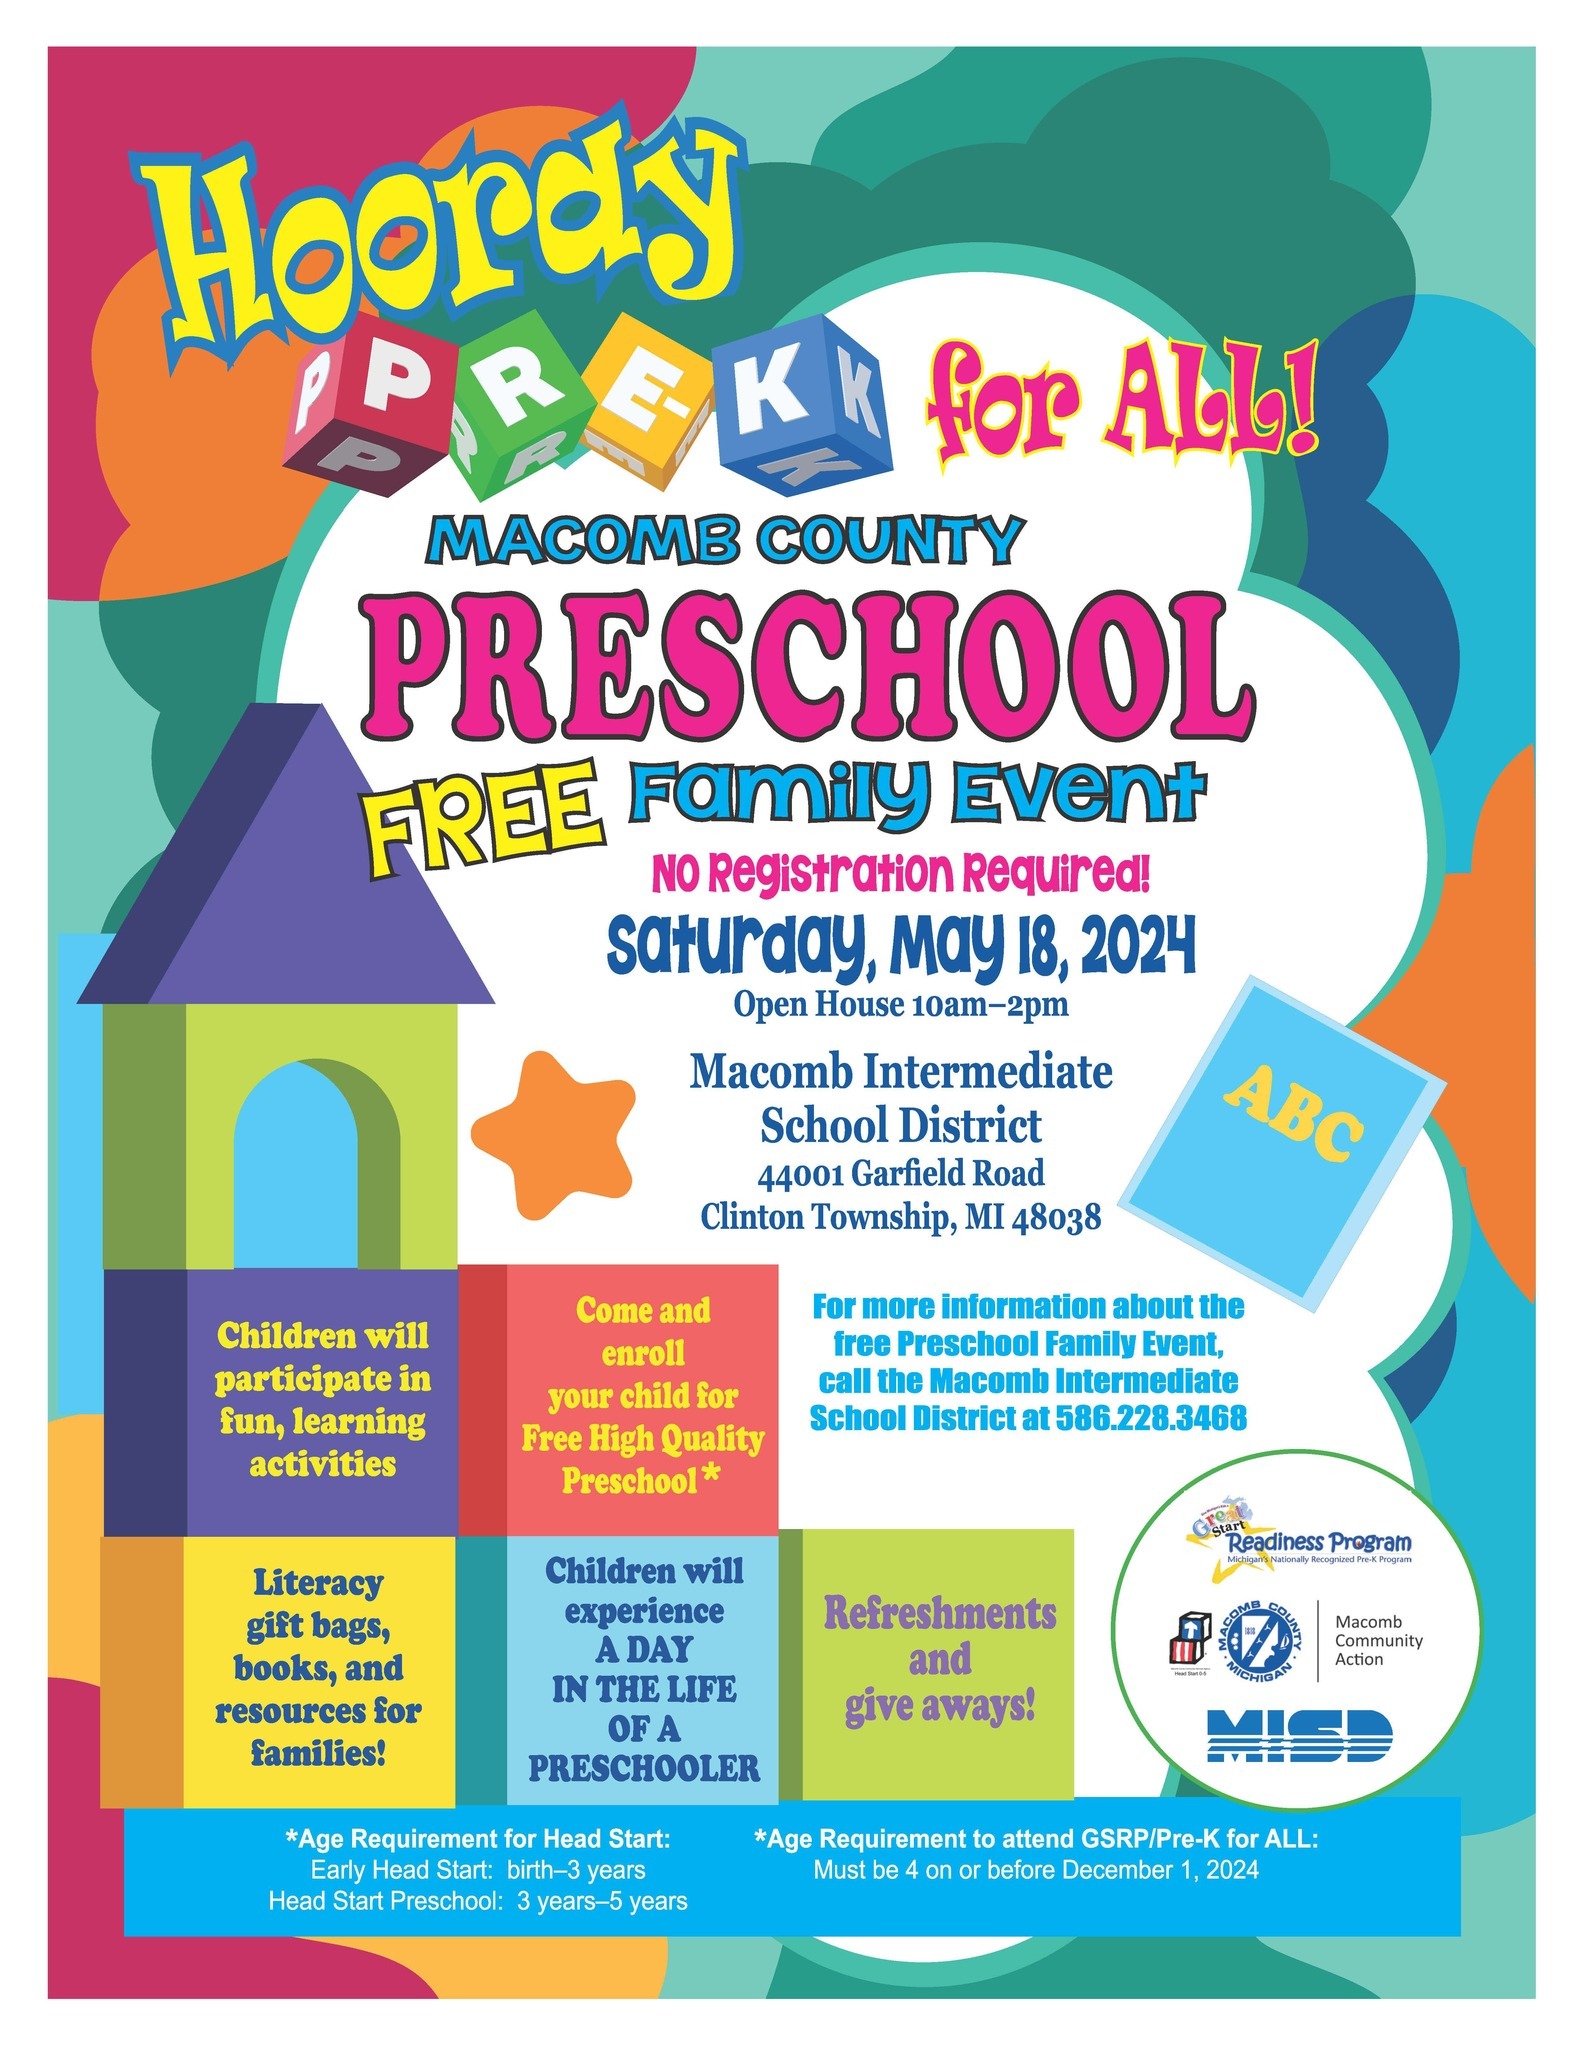 Macomb County Preschool Free Family Event Open House 10 am to 2 pm Saturday, May 18, 2024 Macomb Intermediate School District  44001 Garfield Road, Clinton Township, MI 48038 For more information about the free Preschool Family Even call the Macomb Intermediate School District at 586-228-3468  Age Requirement for Head Start: Early Head Start: birth - 3 years  Head Start Preschool: 3years  - 5 years.  Age Requirement to attend GSRP / Pre-K for ALL: Must be 4 on or before December 1, 2024